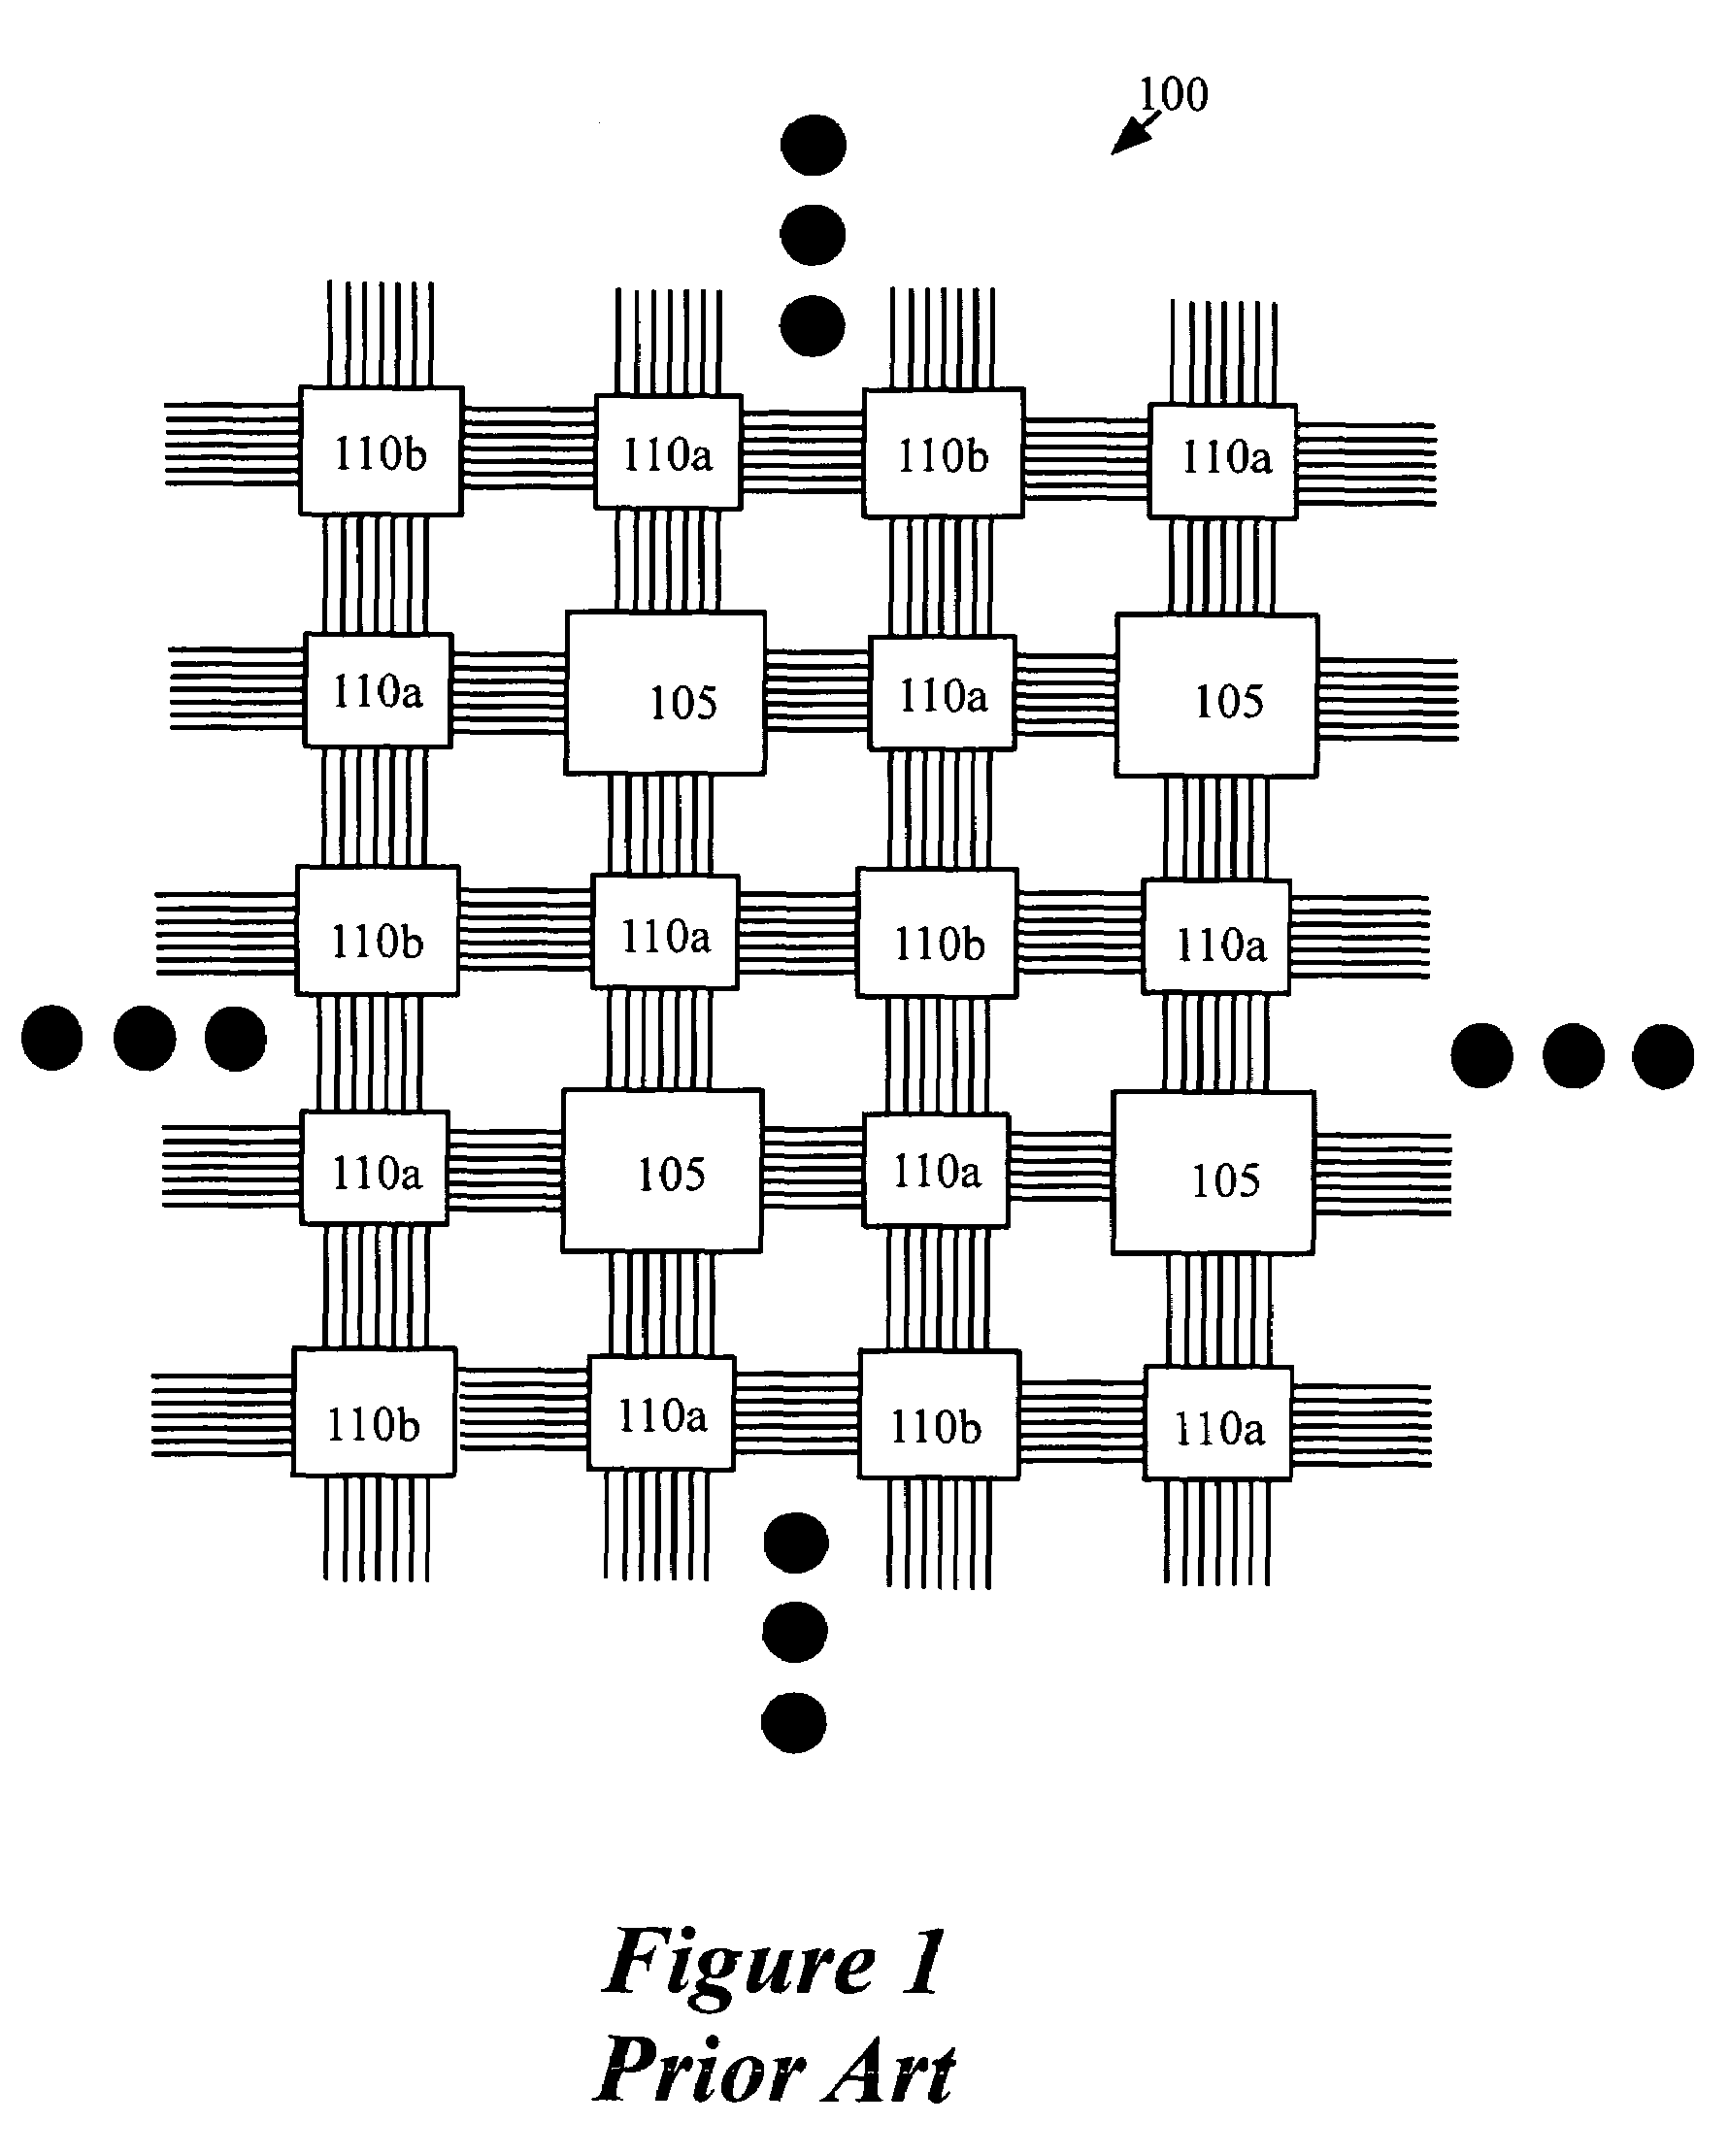 Configurable integrated circuit with built-in turns